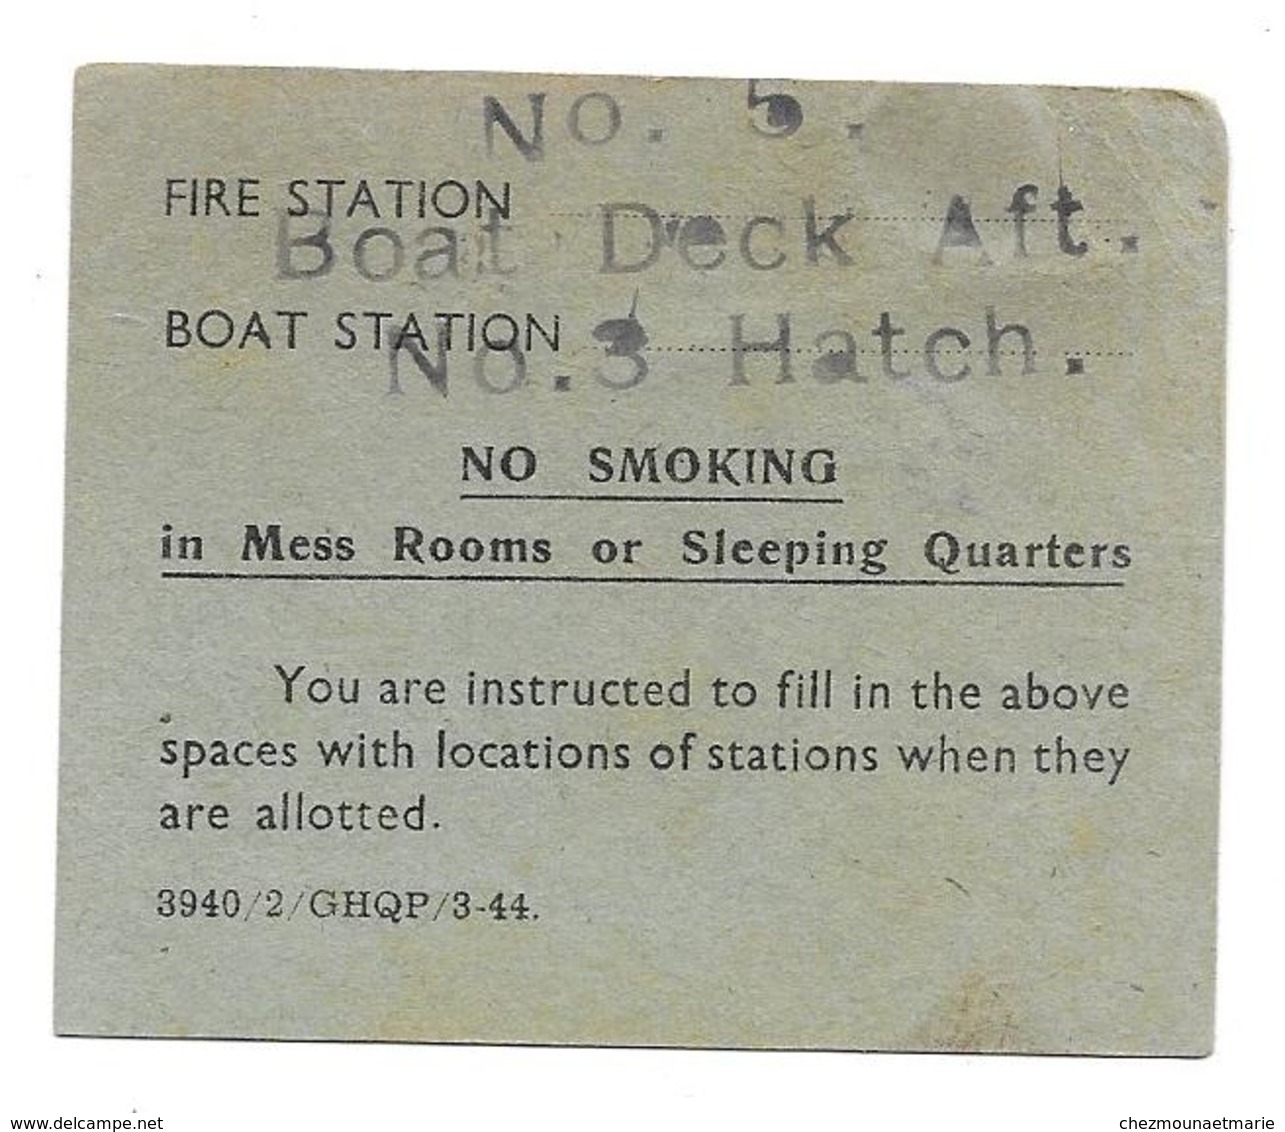 BERTHING CARD - N°5 BOAT DECK AFT N°3 HATCH - FIRE STATION BOAT SATATION - MILITAIRE - Bateaux